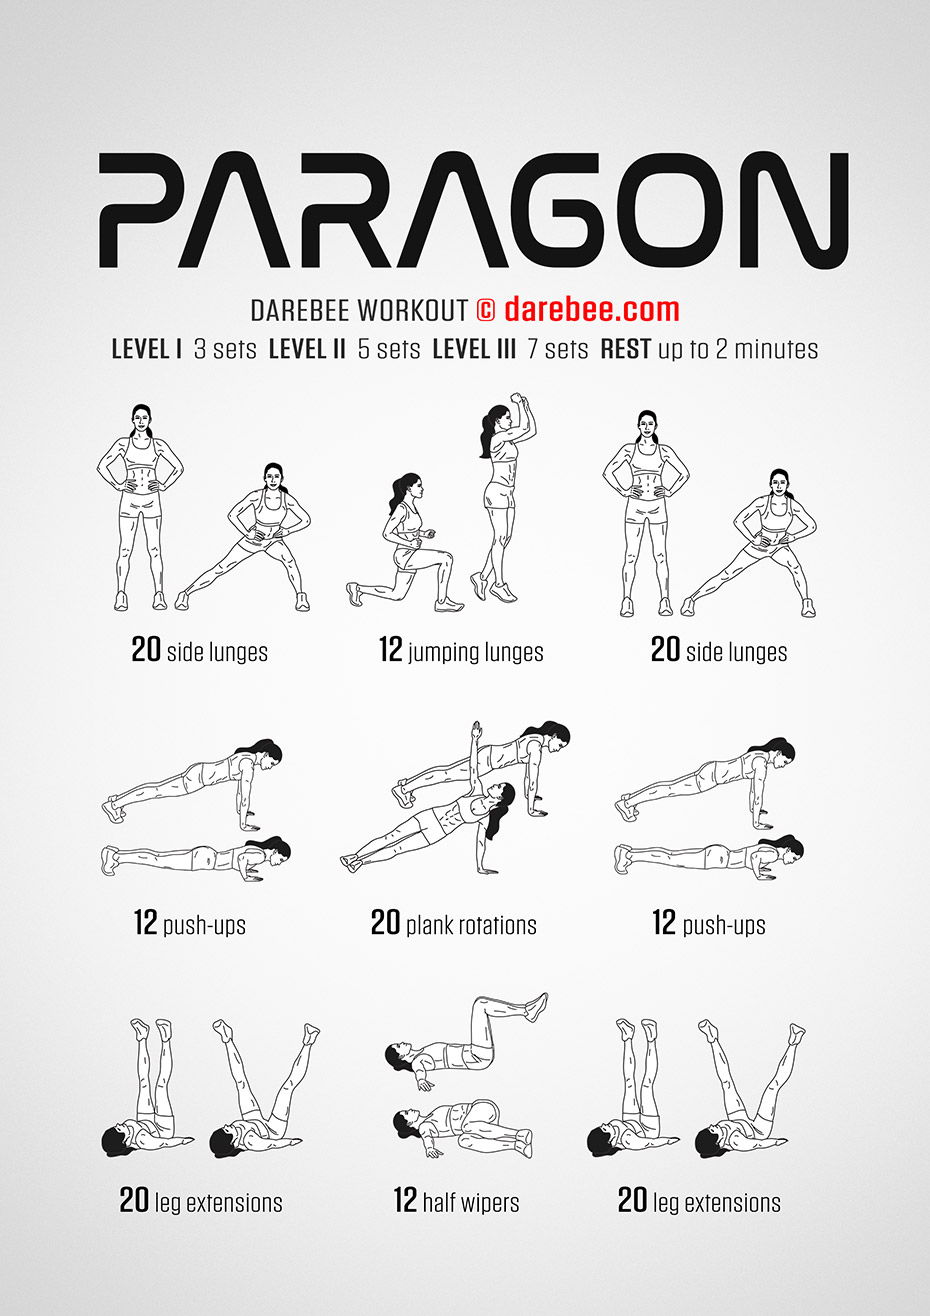 https://darebee.com/images/workouts/paragon-workout.jpg